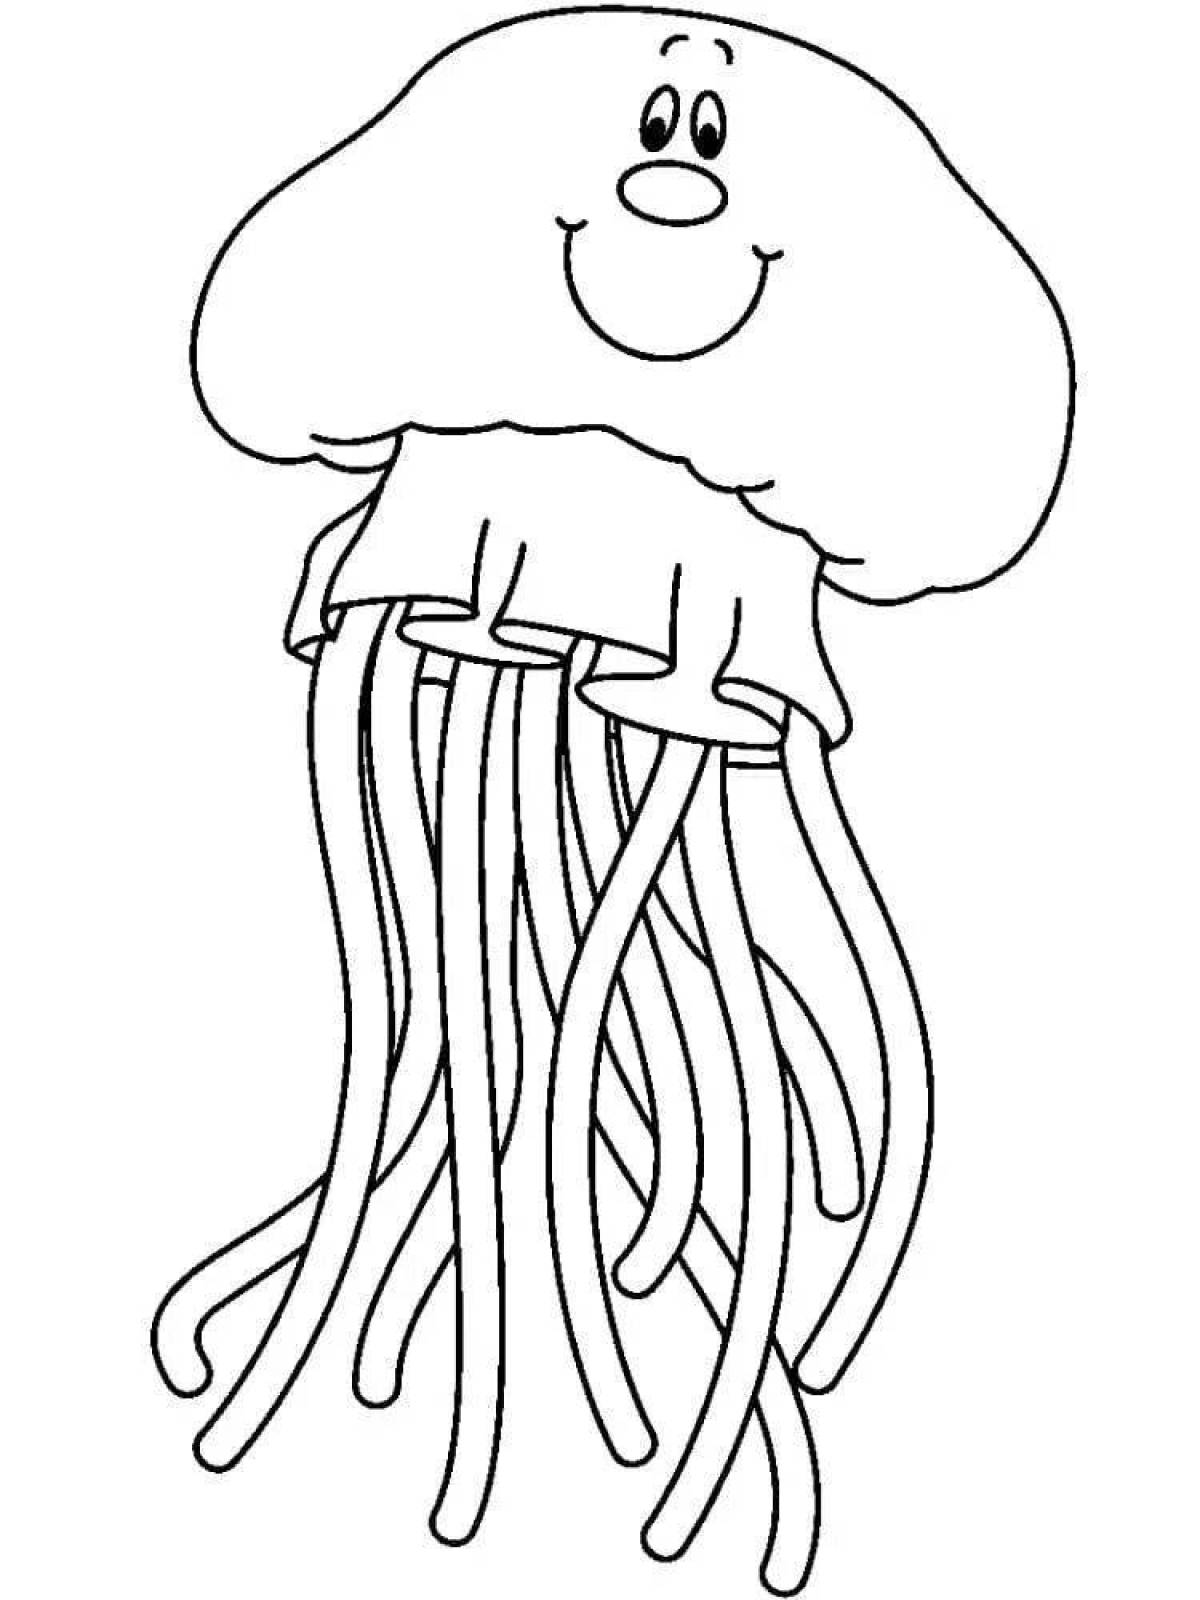 Dazzling jellyfish coloring book for kids